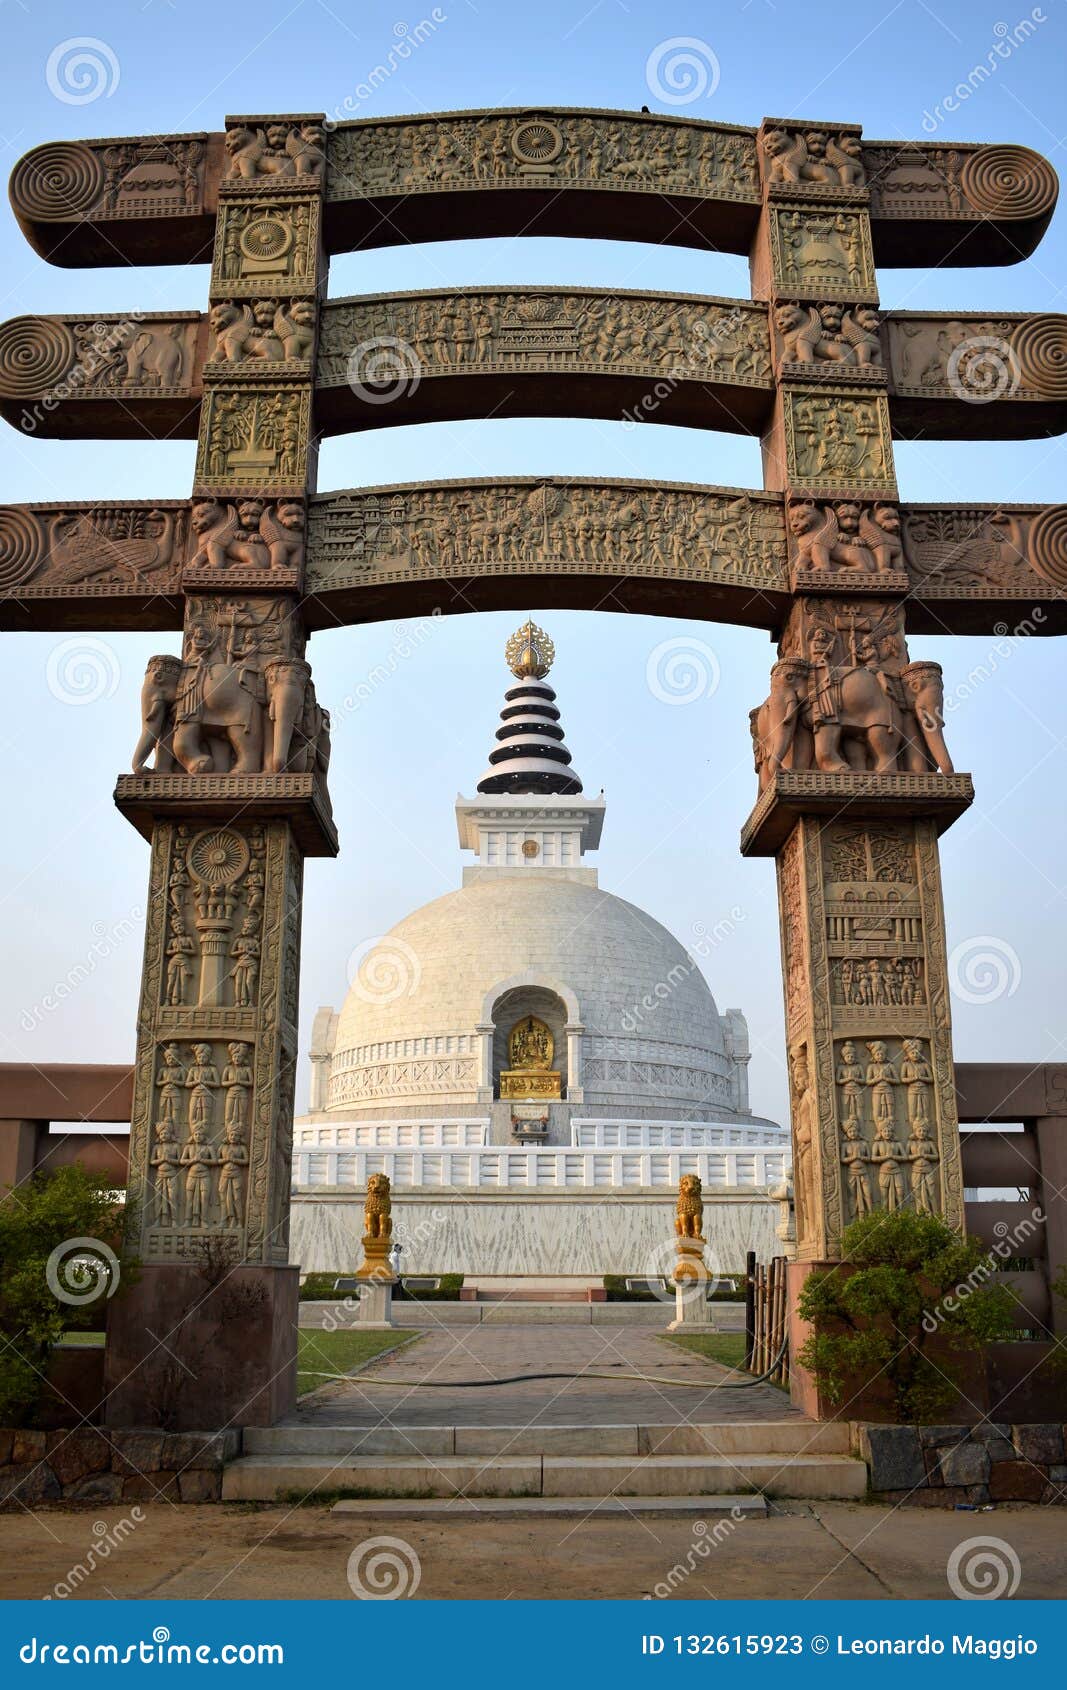 entrance arch to the stupa shanti with the stupa in the background in delhi